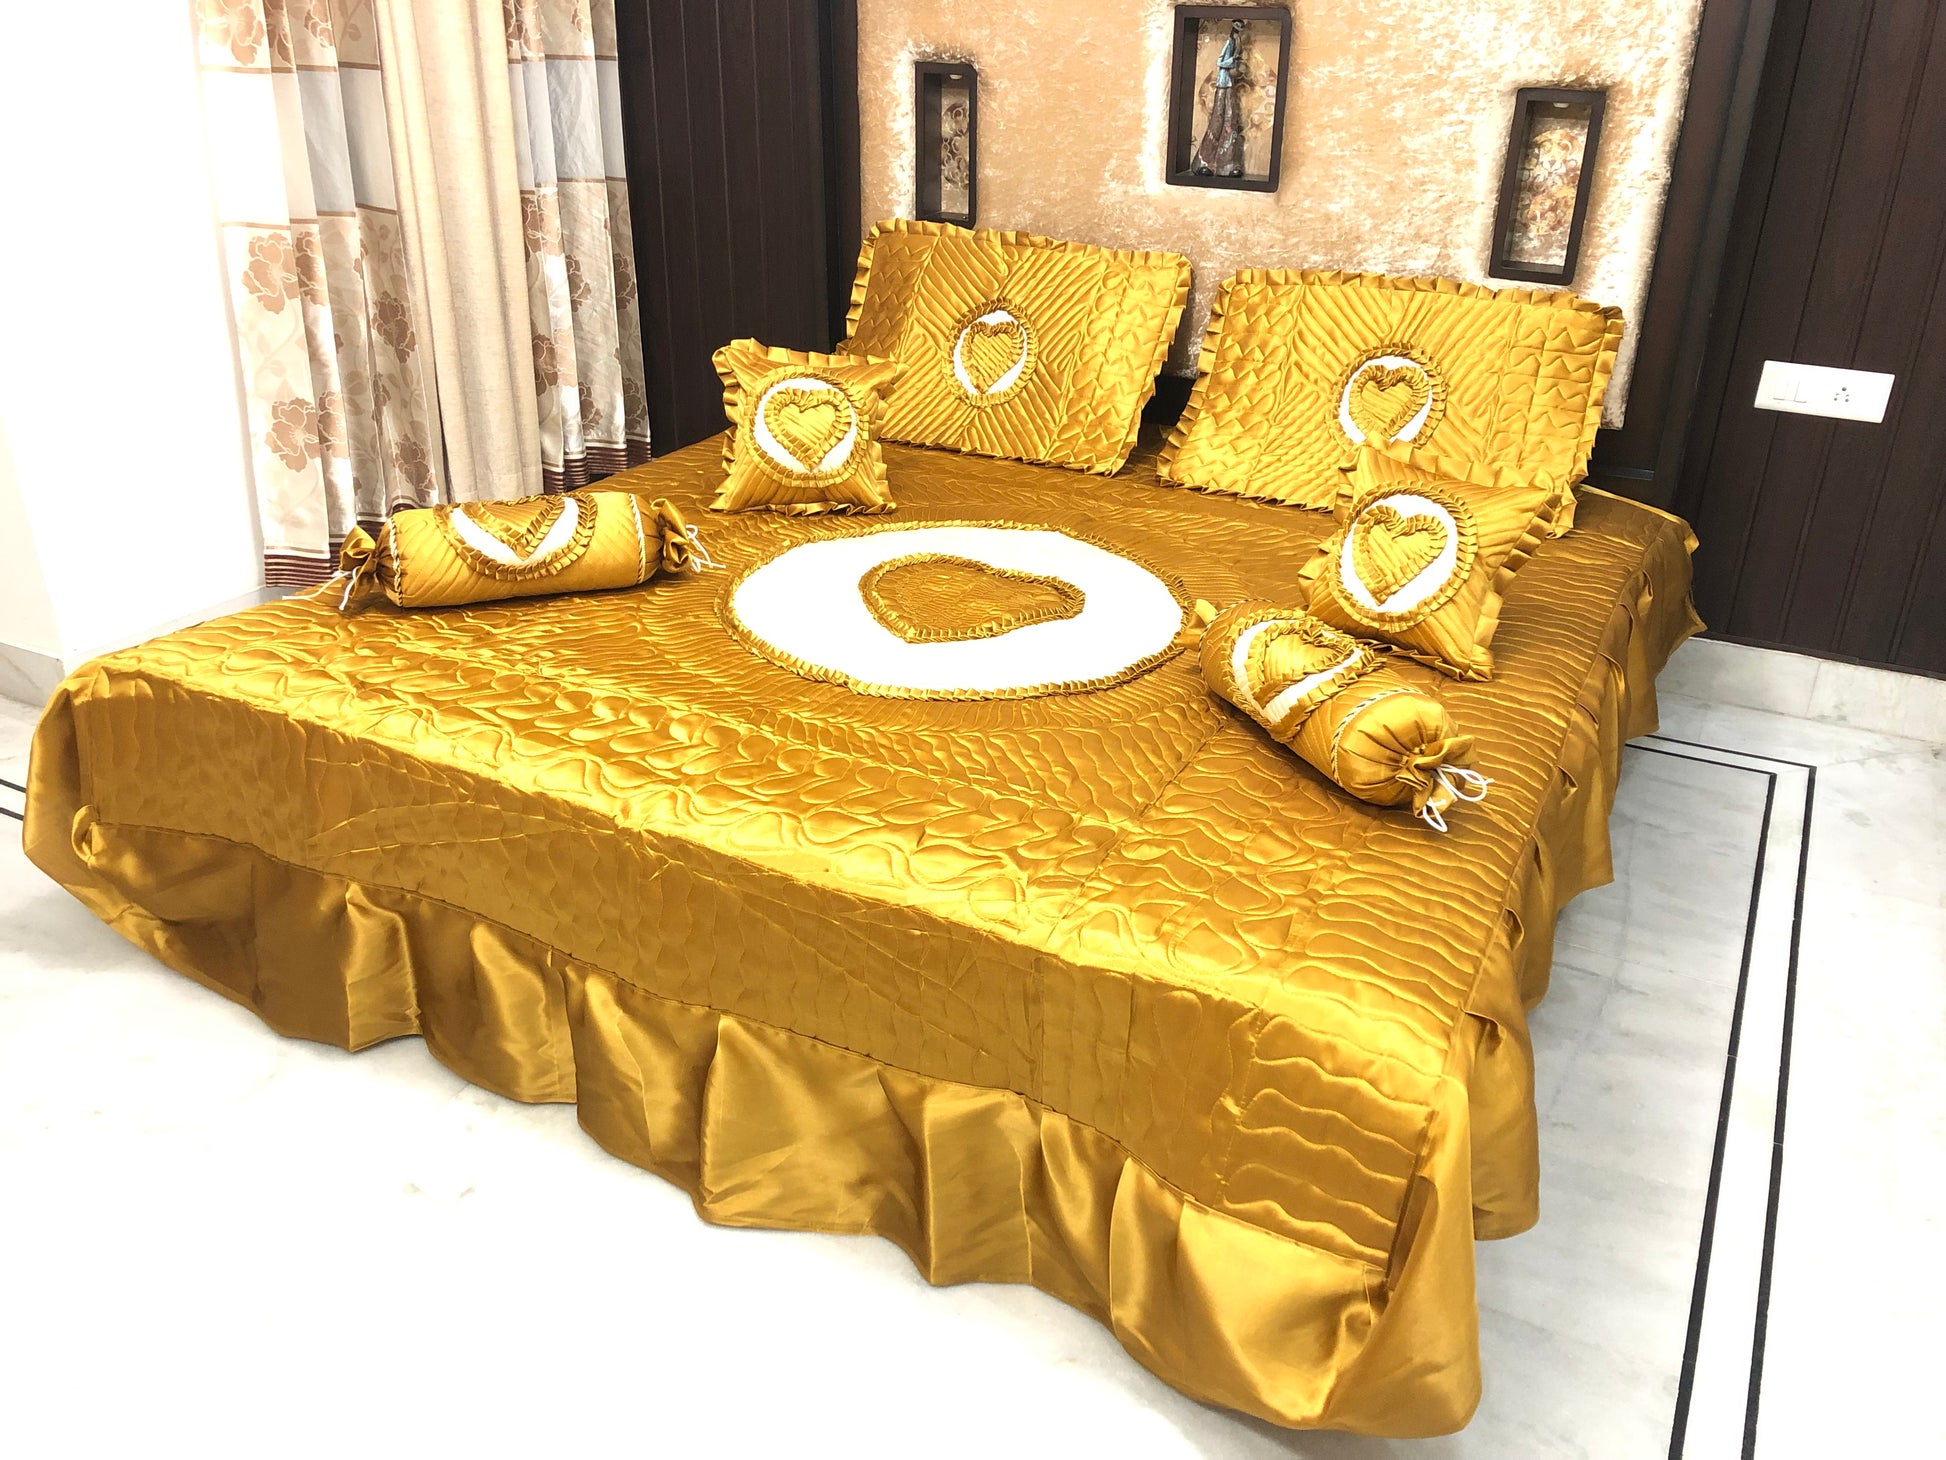 loomsmith-satin-bedsheet-set-of-7-heart-design-in-gold-color-two-filled-cushions-two-filled-bolsters-King-Size-set-two-pillow-covers